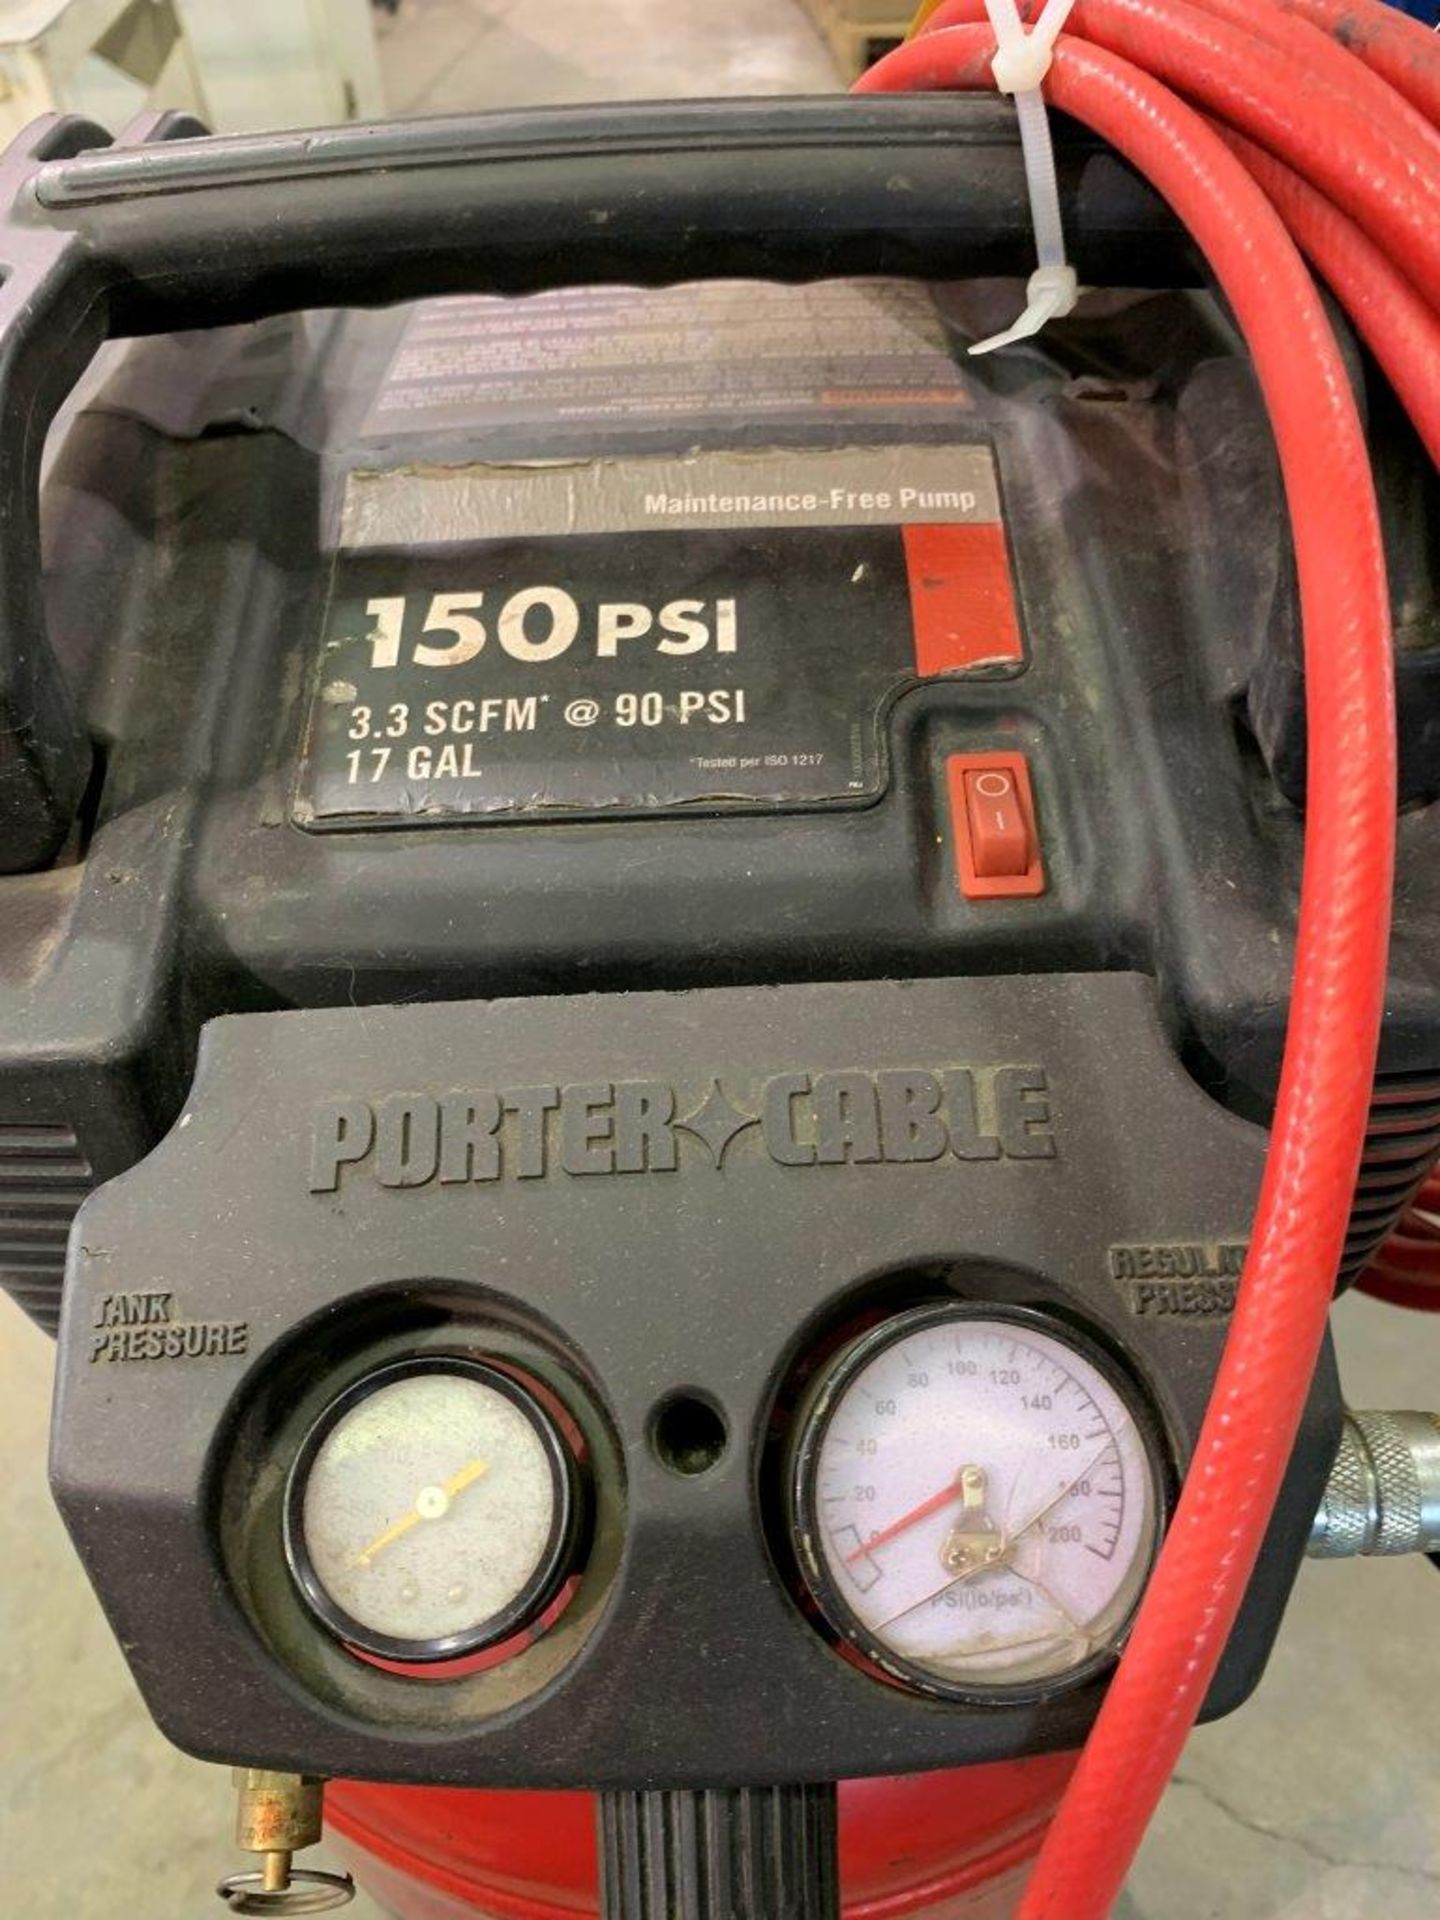 PORTER CABLE 150 PSI 17 GAL. PORTABLE AIR COMPRESSOR W/ WHEEL KIT - Image 5 of 5